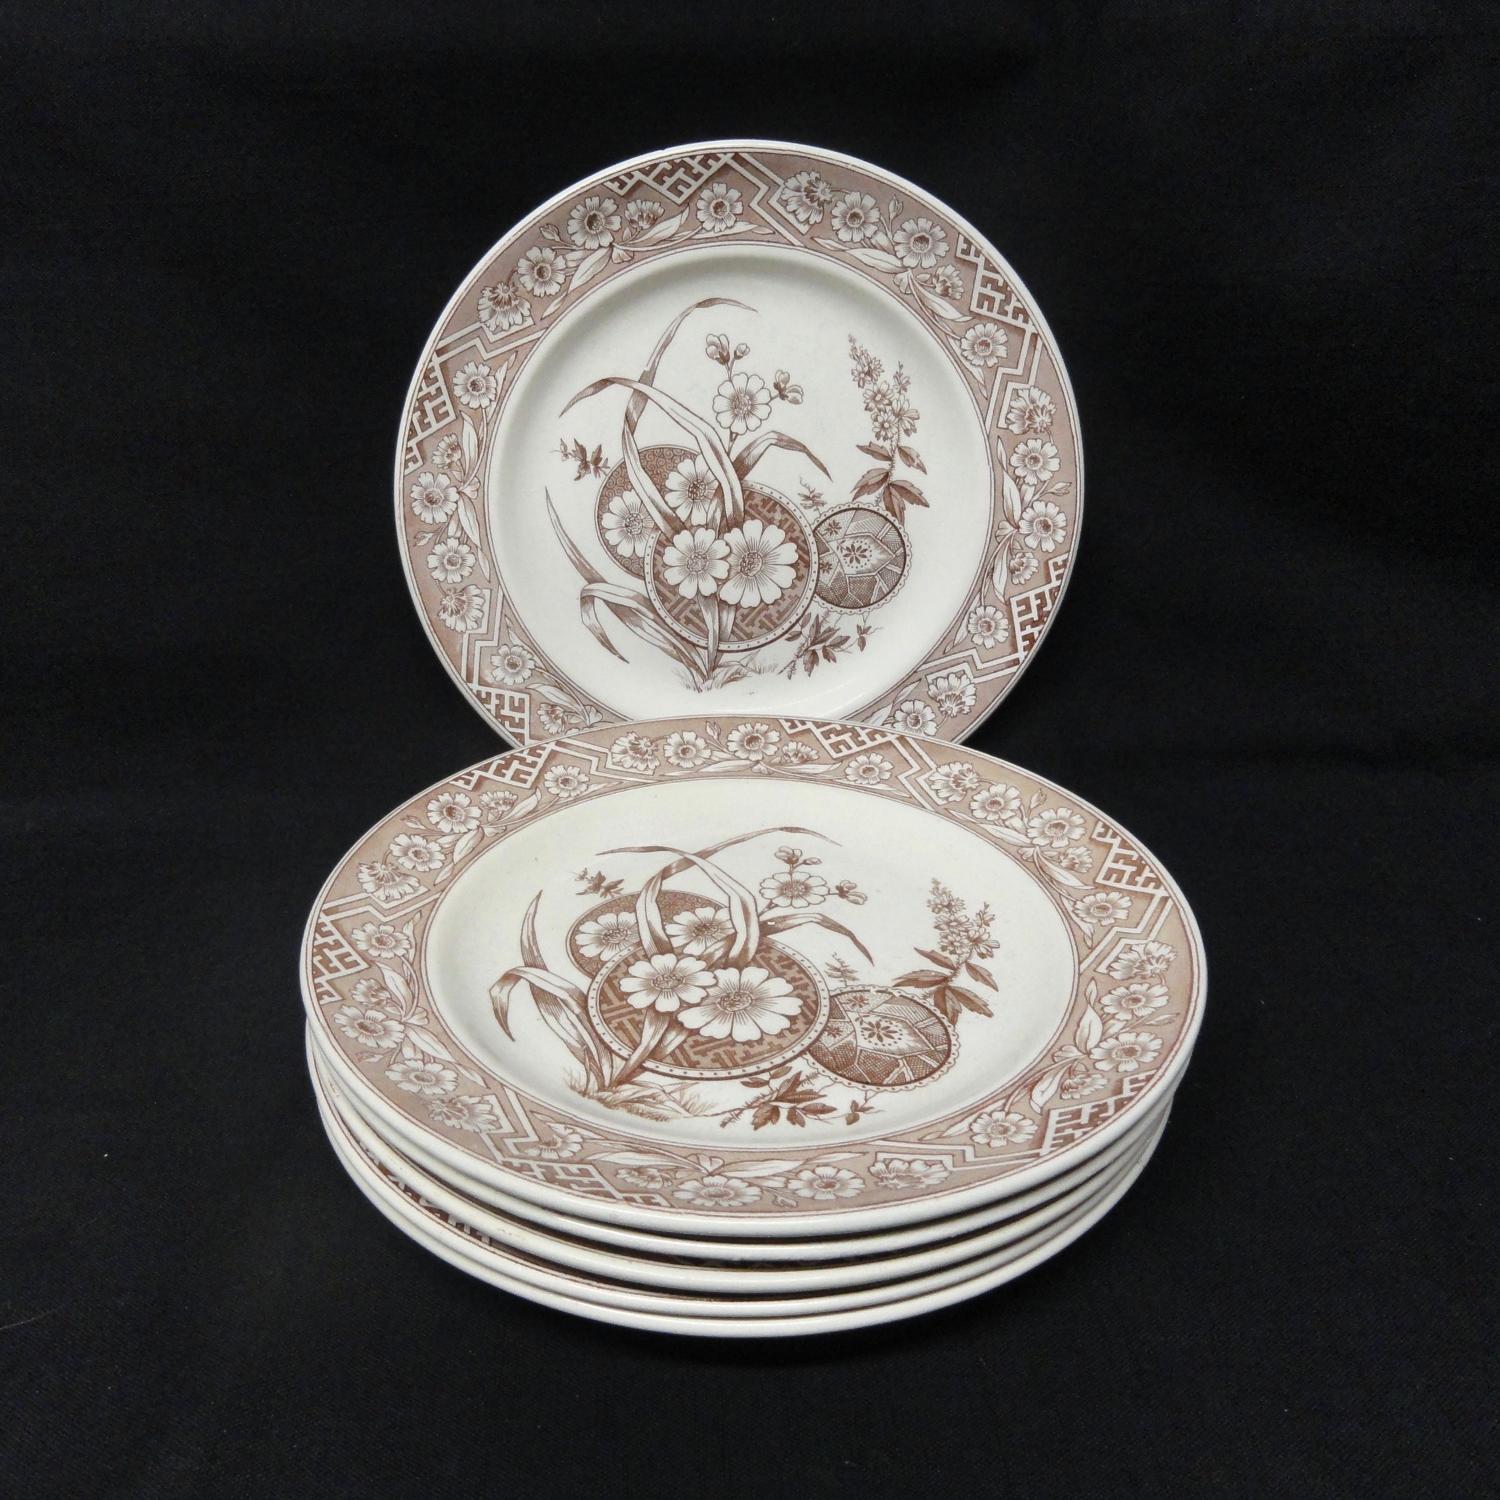 SIX Aesthetic Movement Brown Transferware Plates ~ FLORENCE 1882